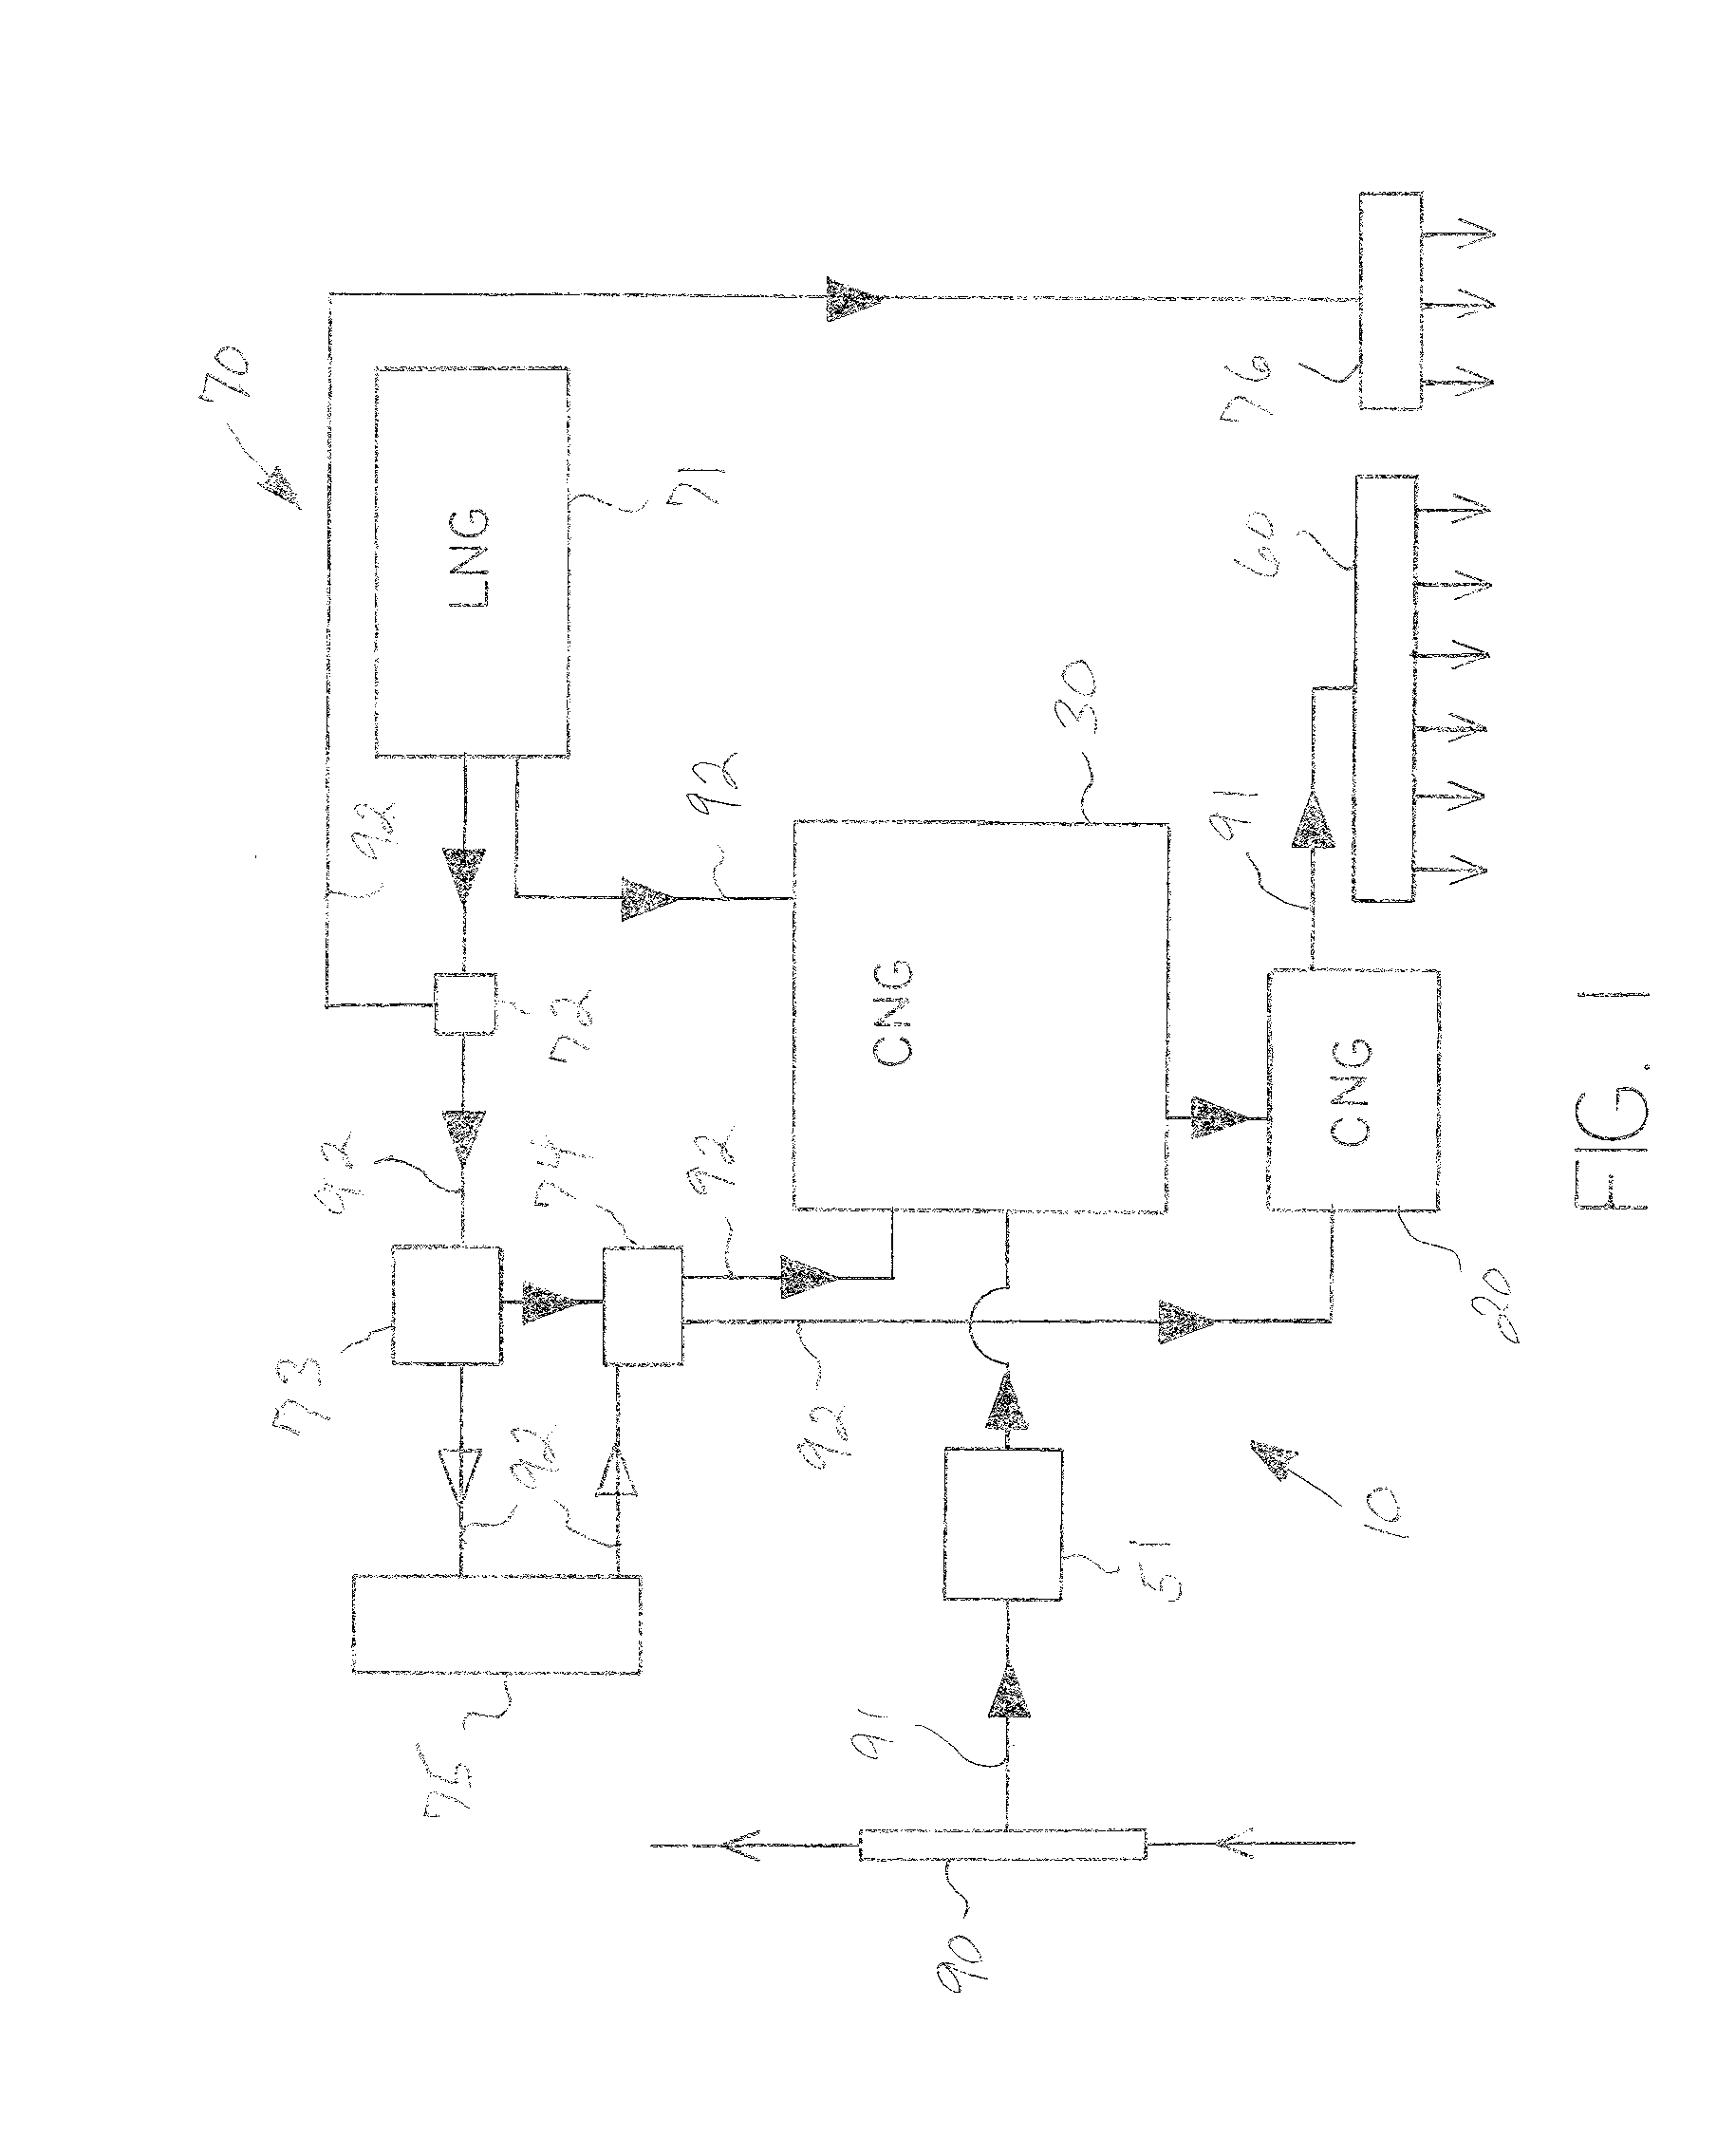 Compressed and Liquified Natural Gas Storage and Dispensing System